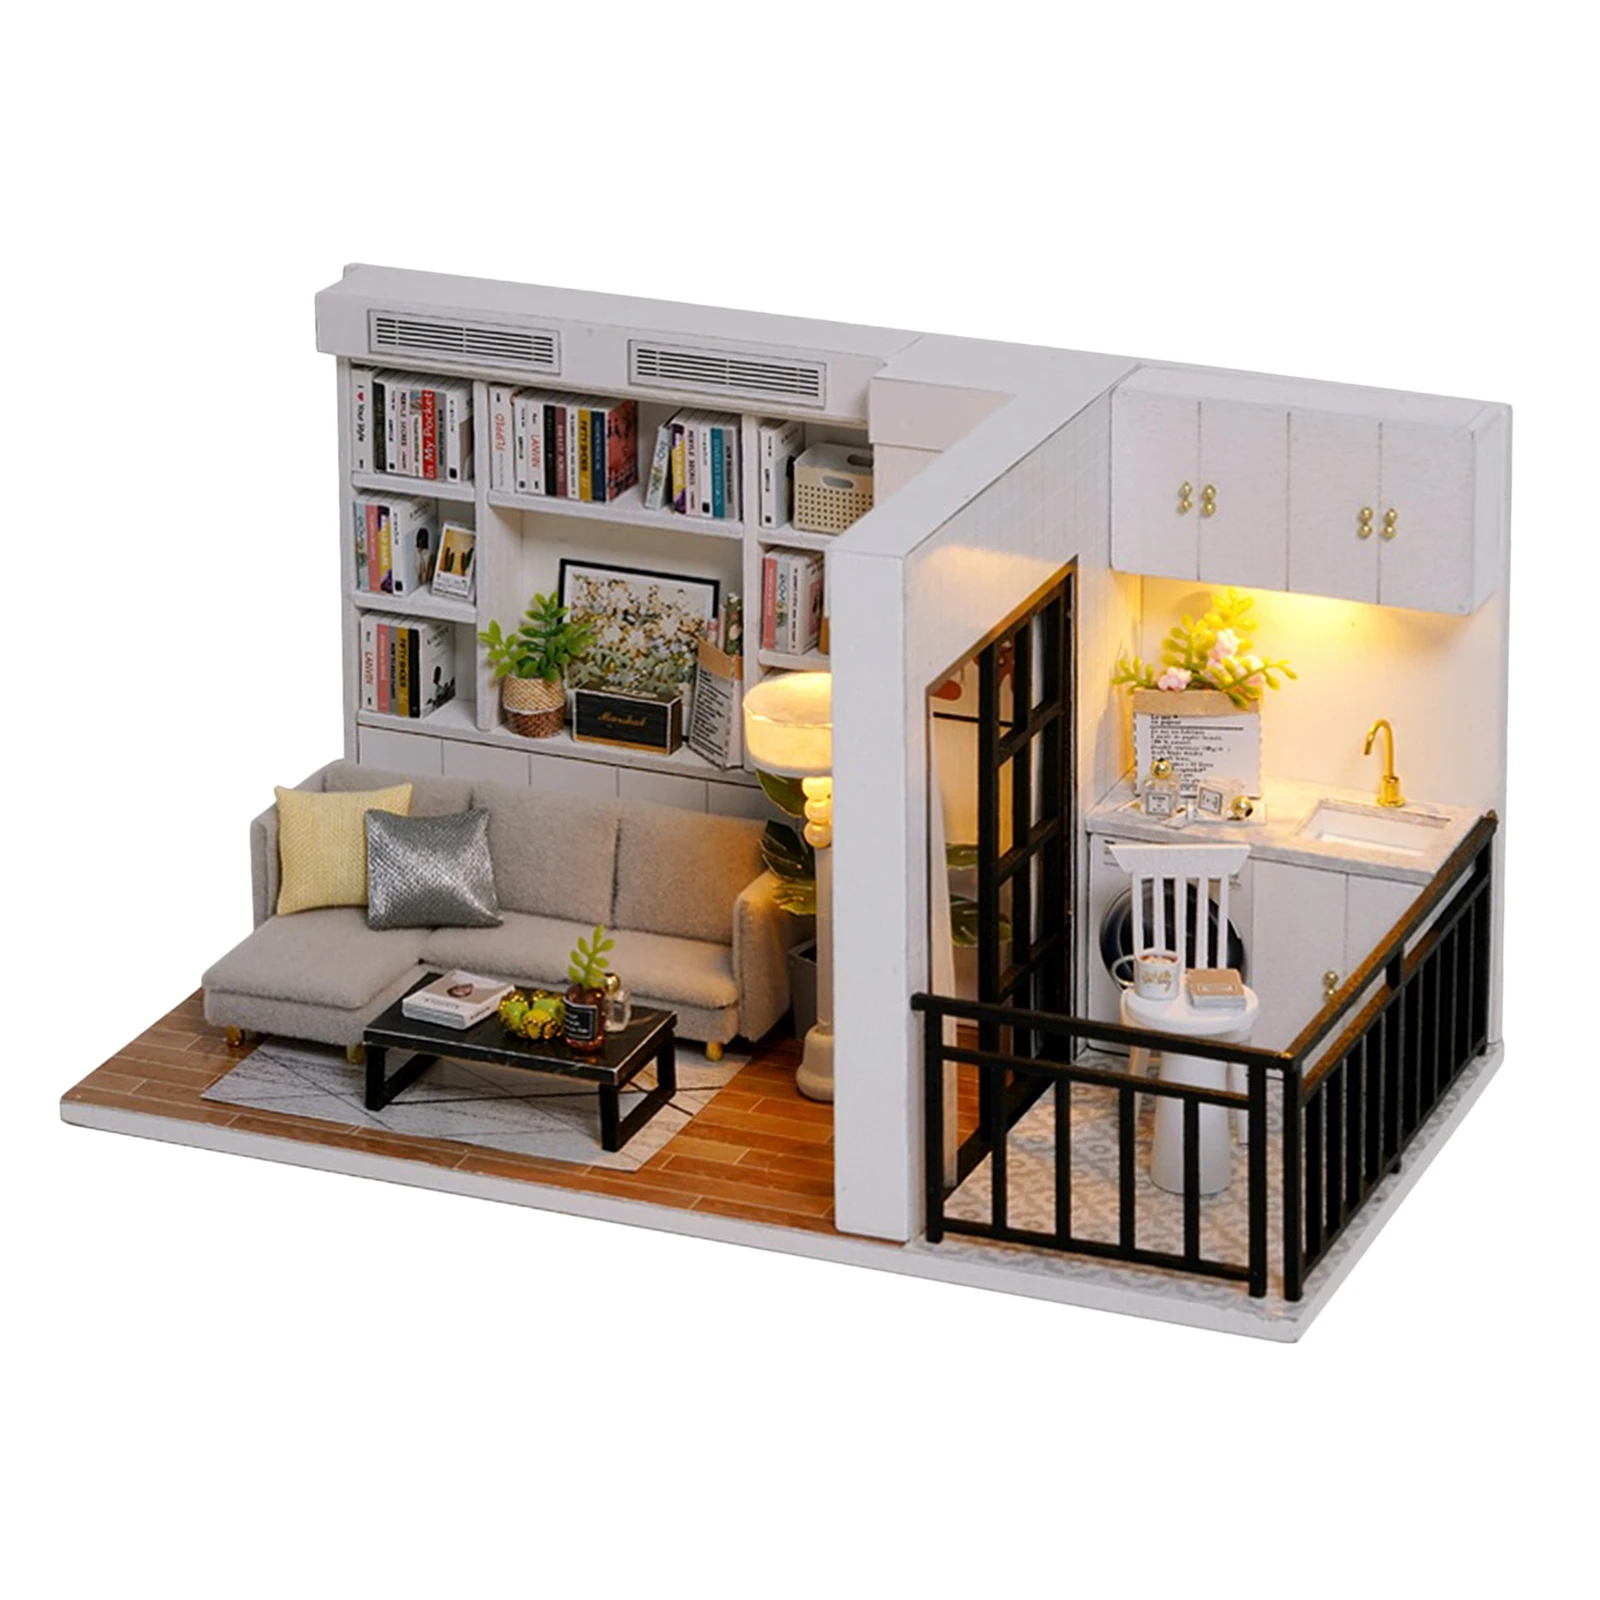 1:32 DIY 3D Wooden Miniature Dolls House with Furniture Building Modern Living Room Puzzles Kit Gift